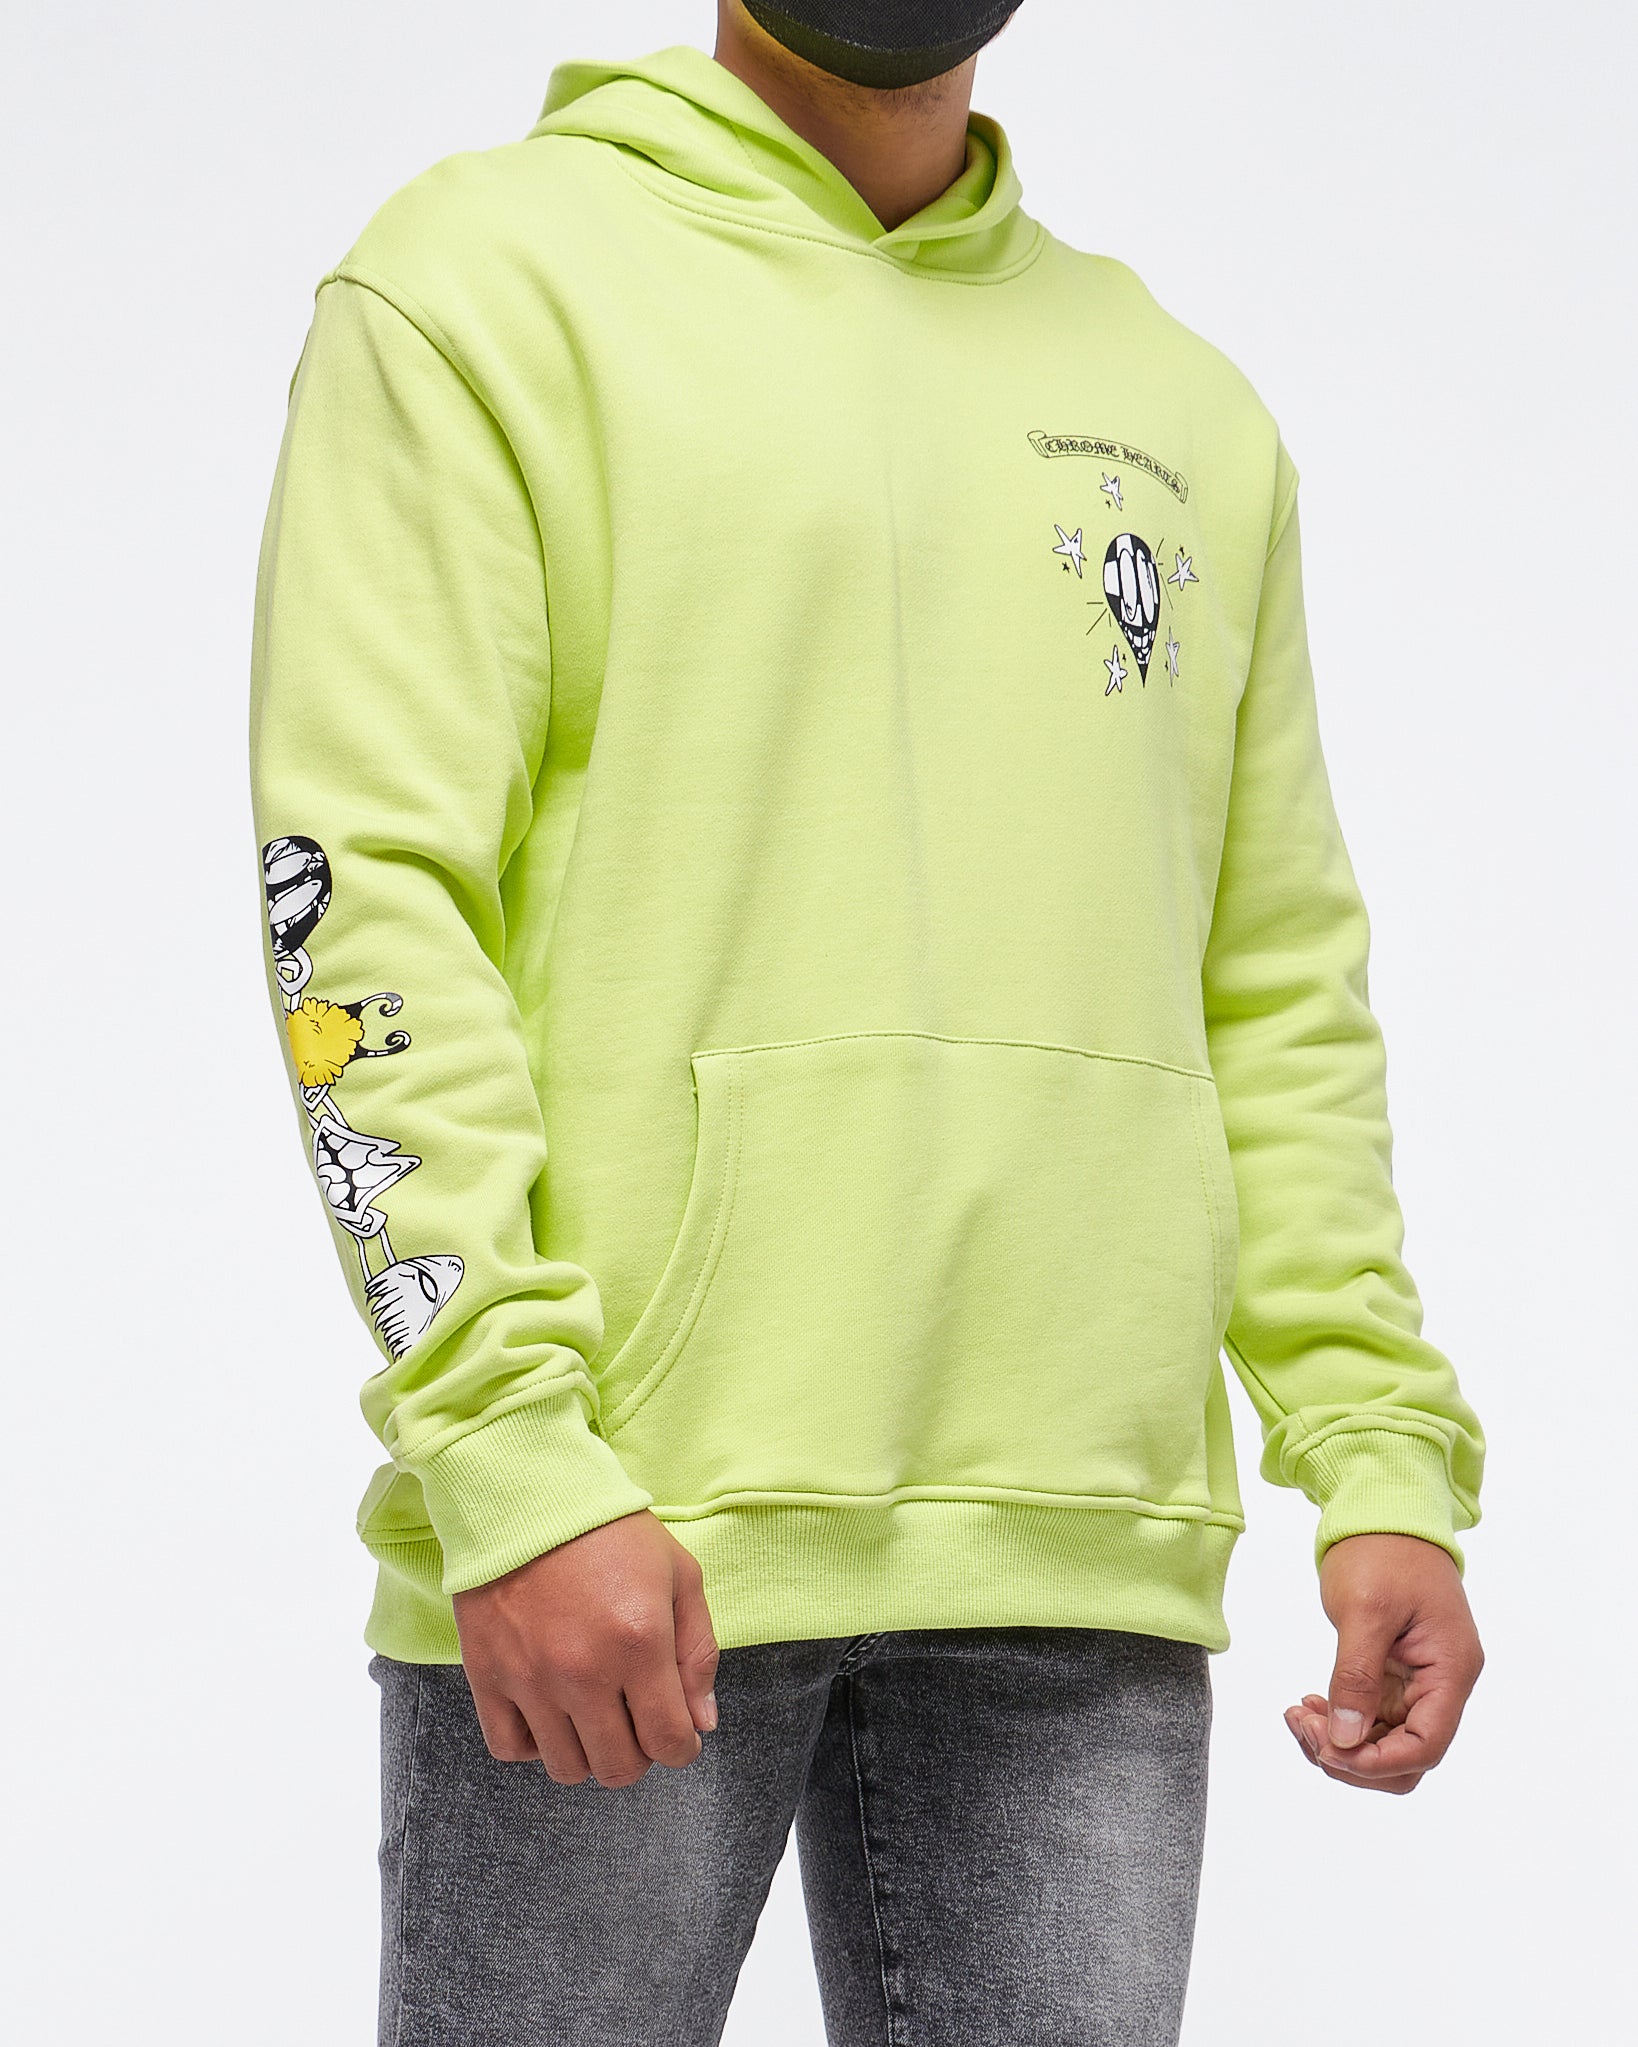 MOI OUTFIT-Front Back Cross Logo Printed Men Hoodie 37.90